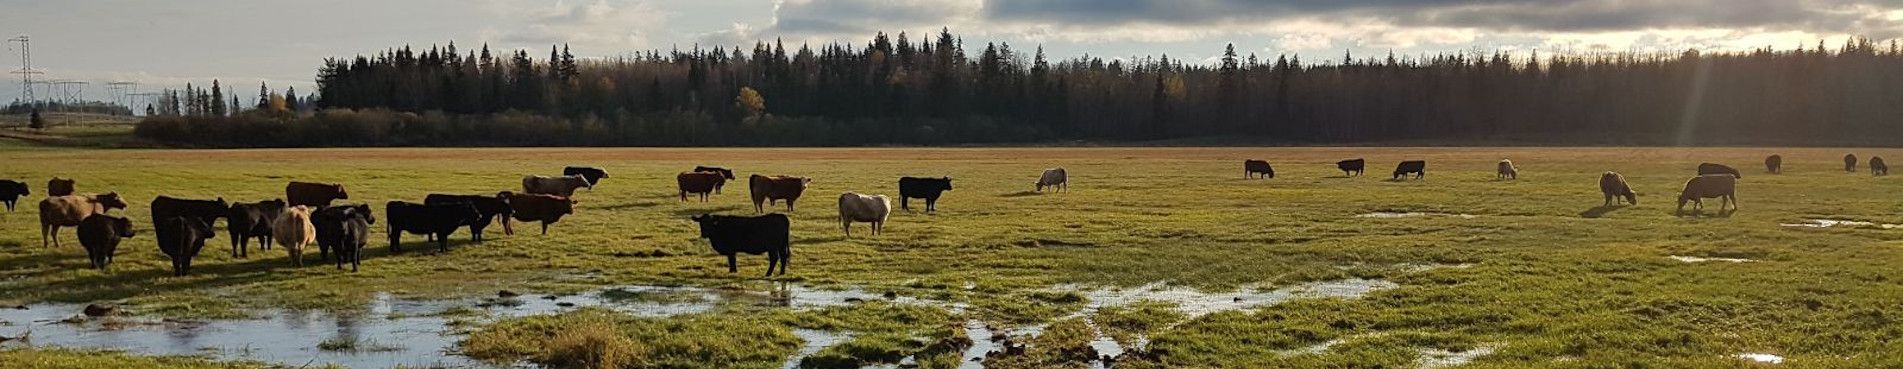 cows standing in a wet field